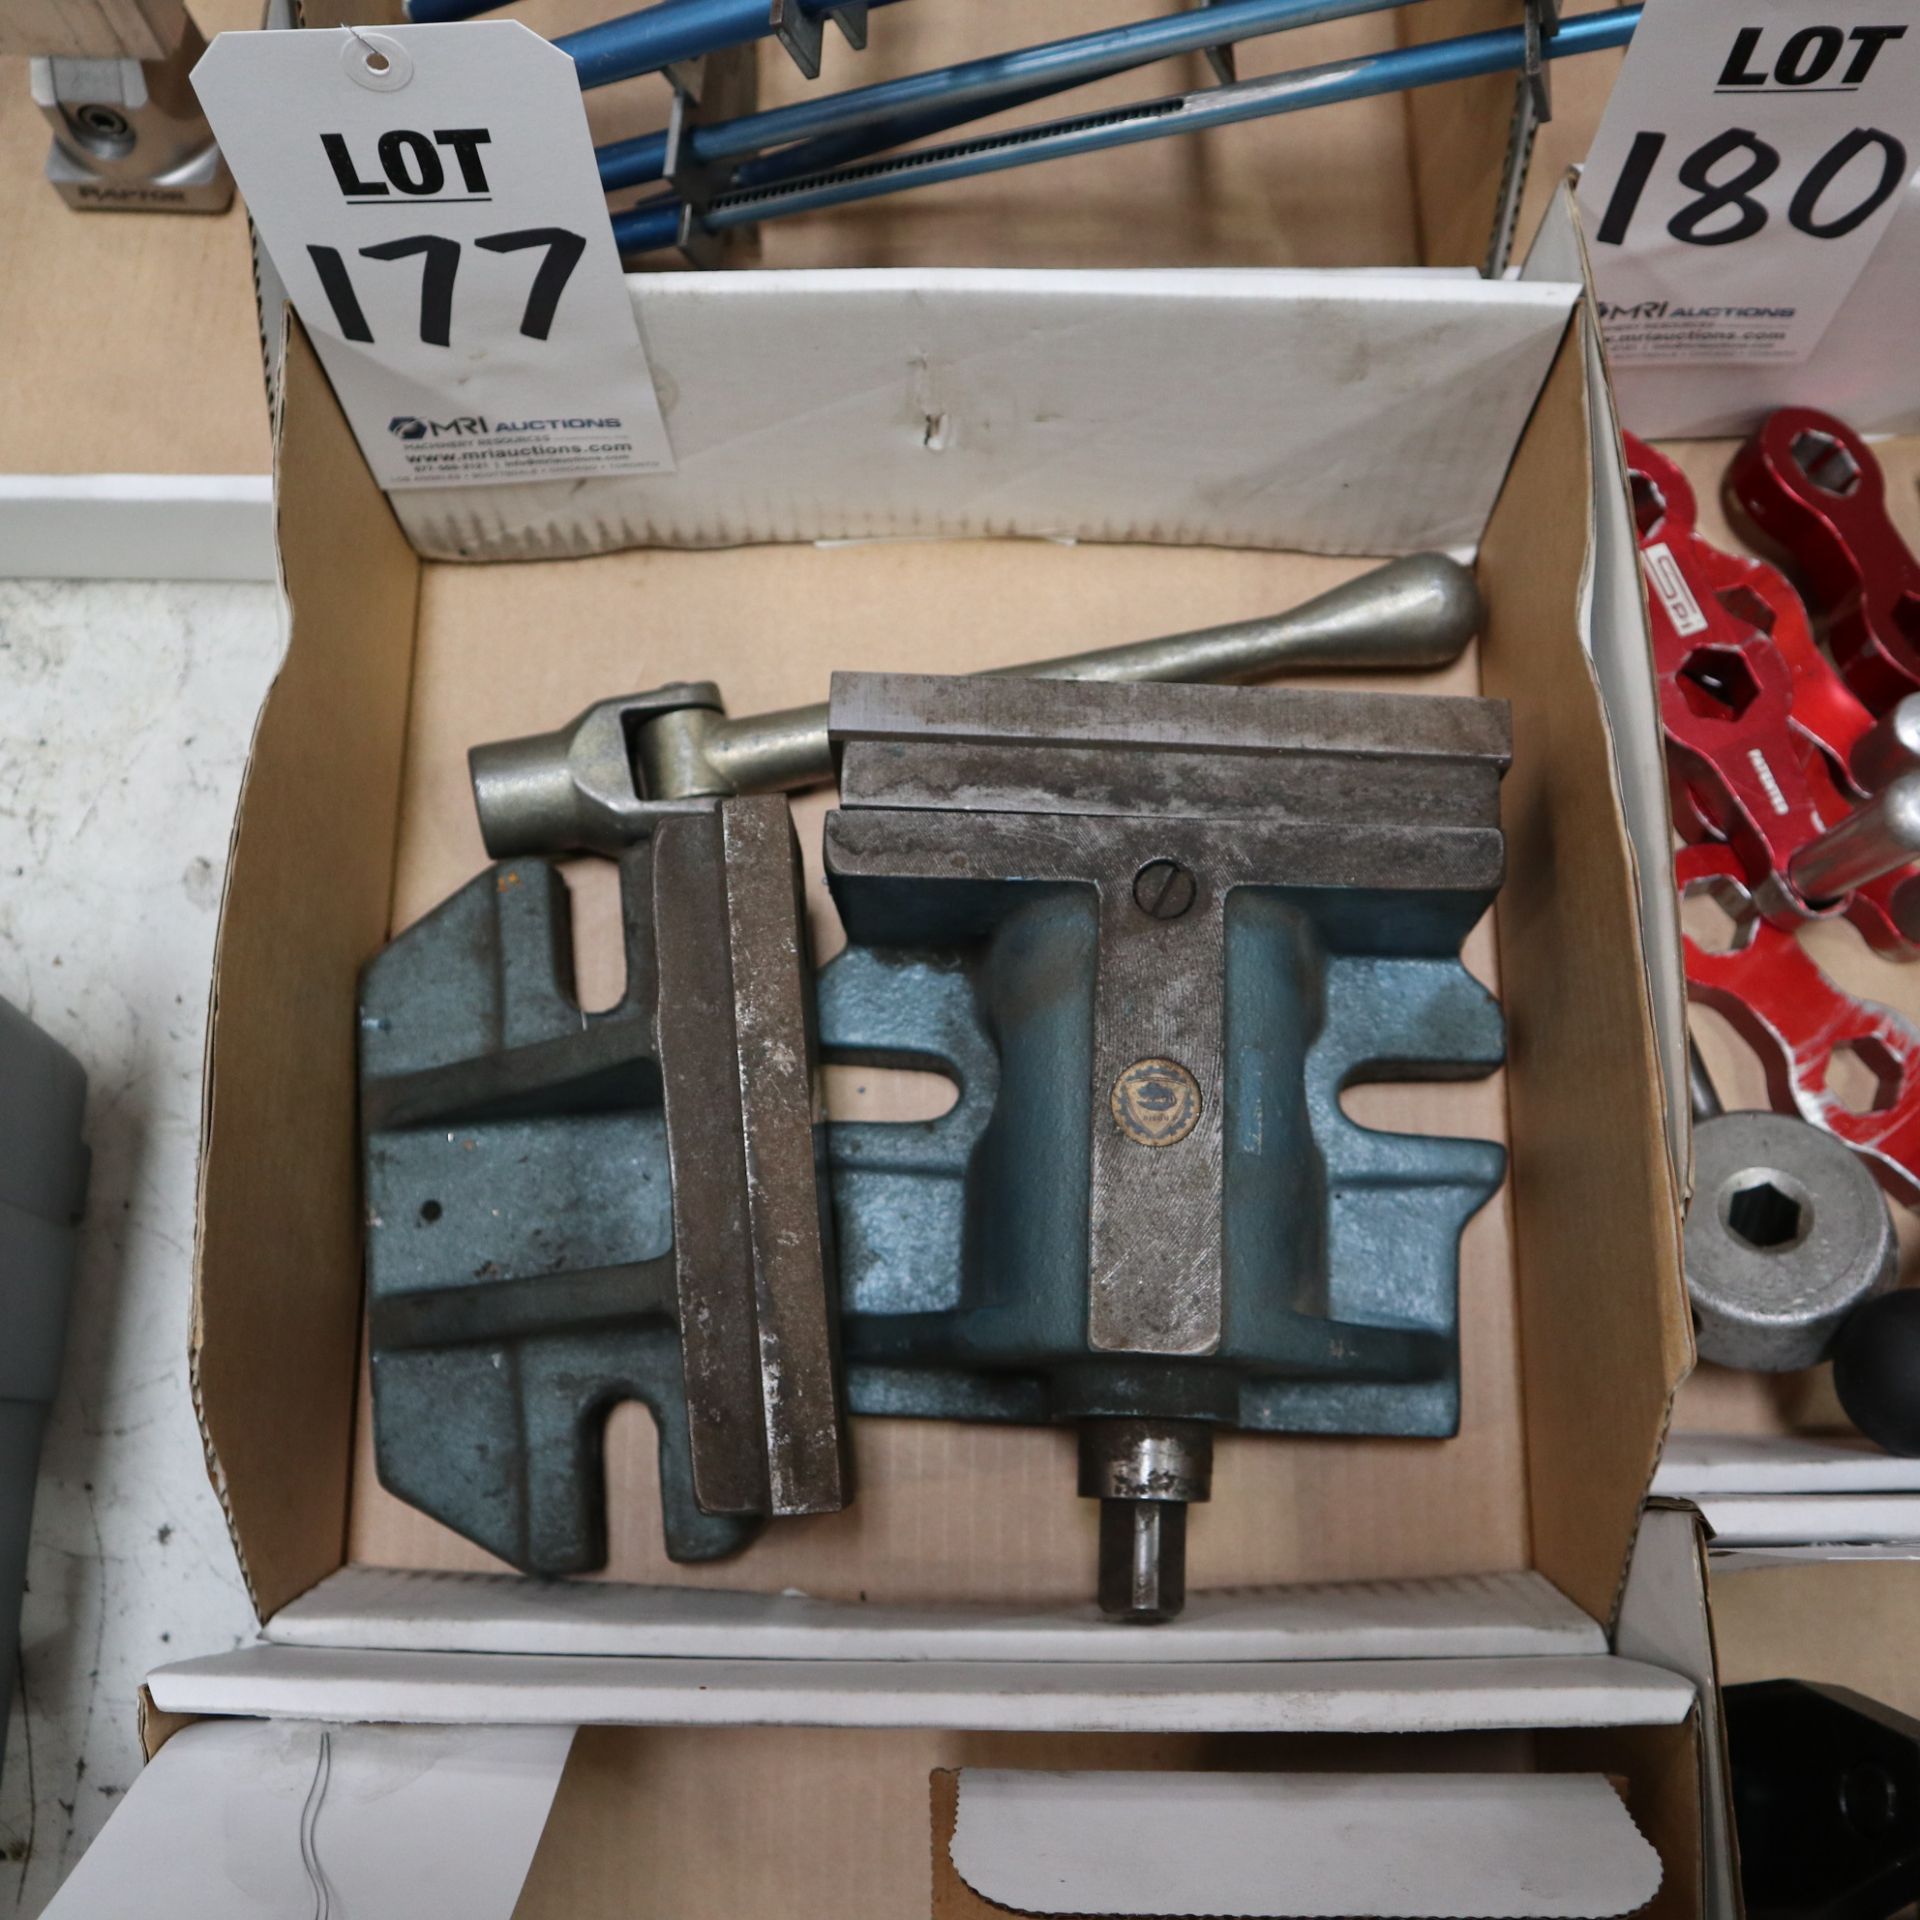 TABLE VISE, 2 PIECES AND HANDLE - Image 2 of 2